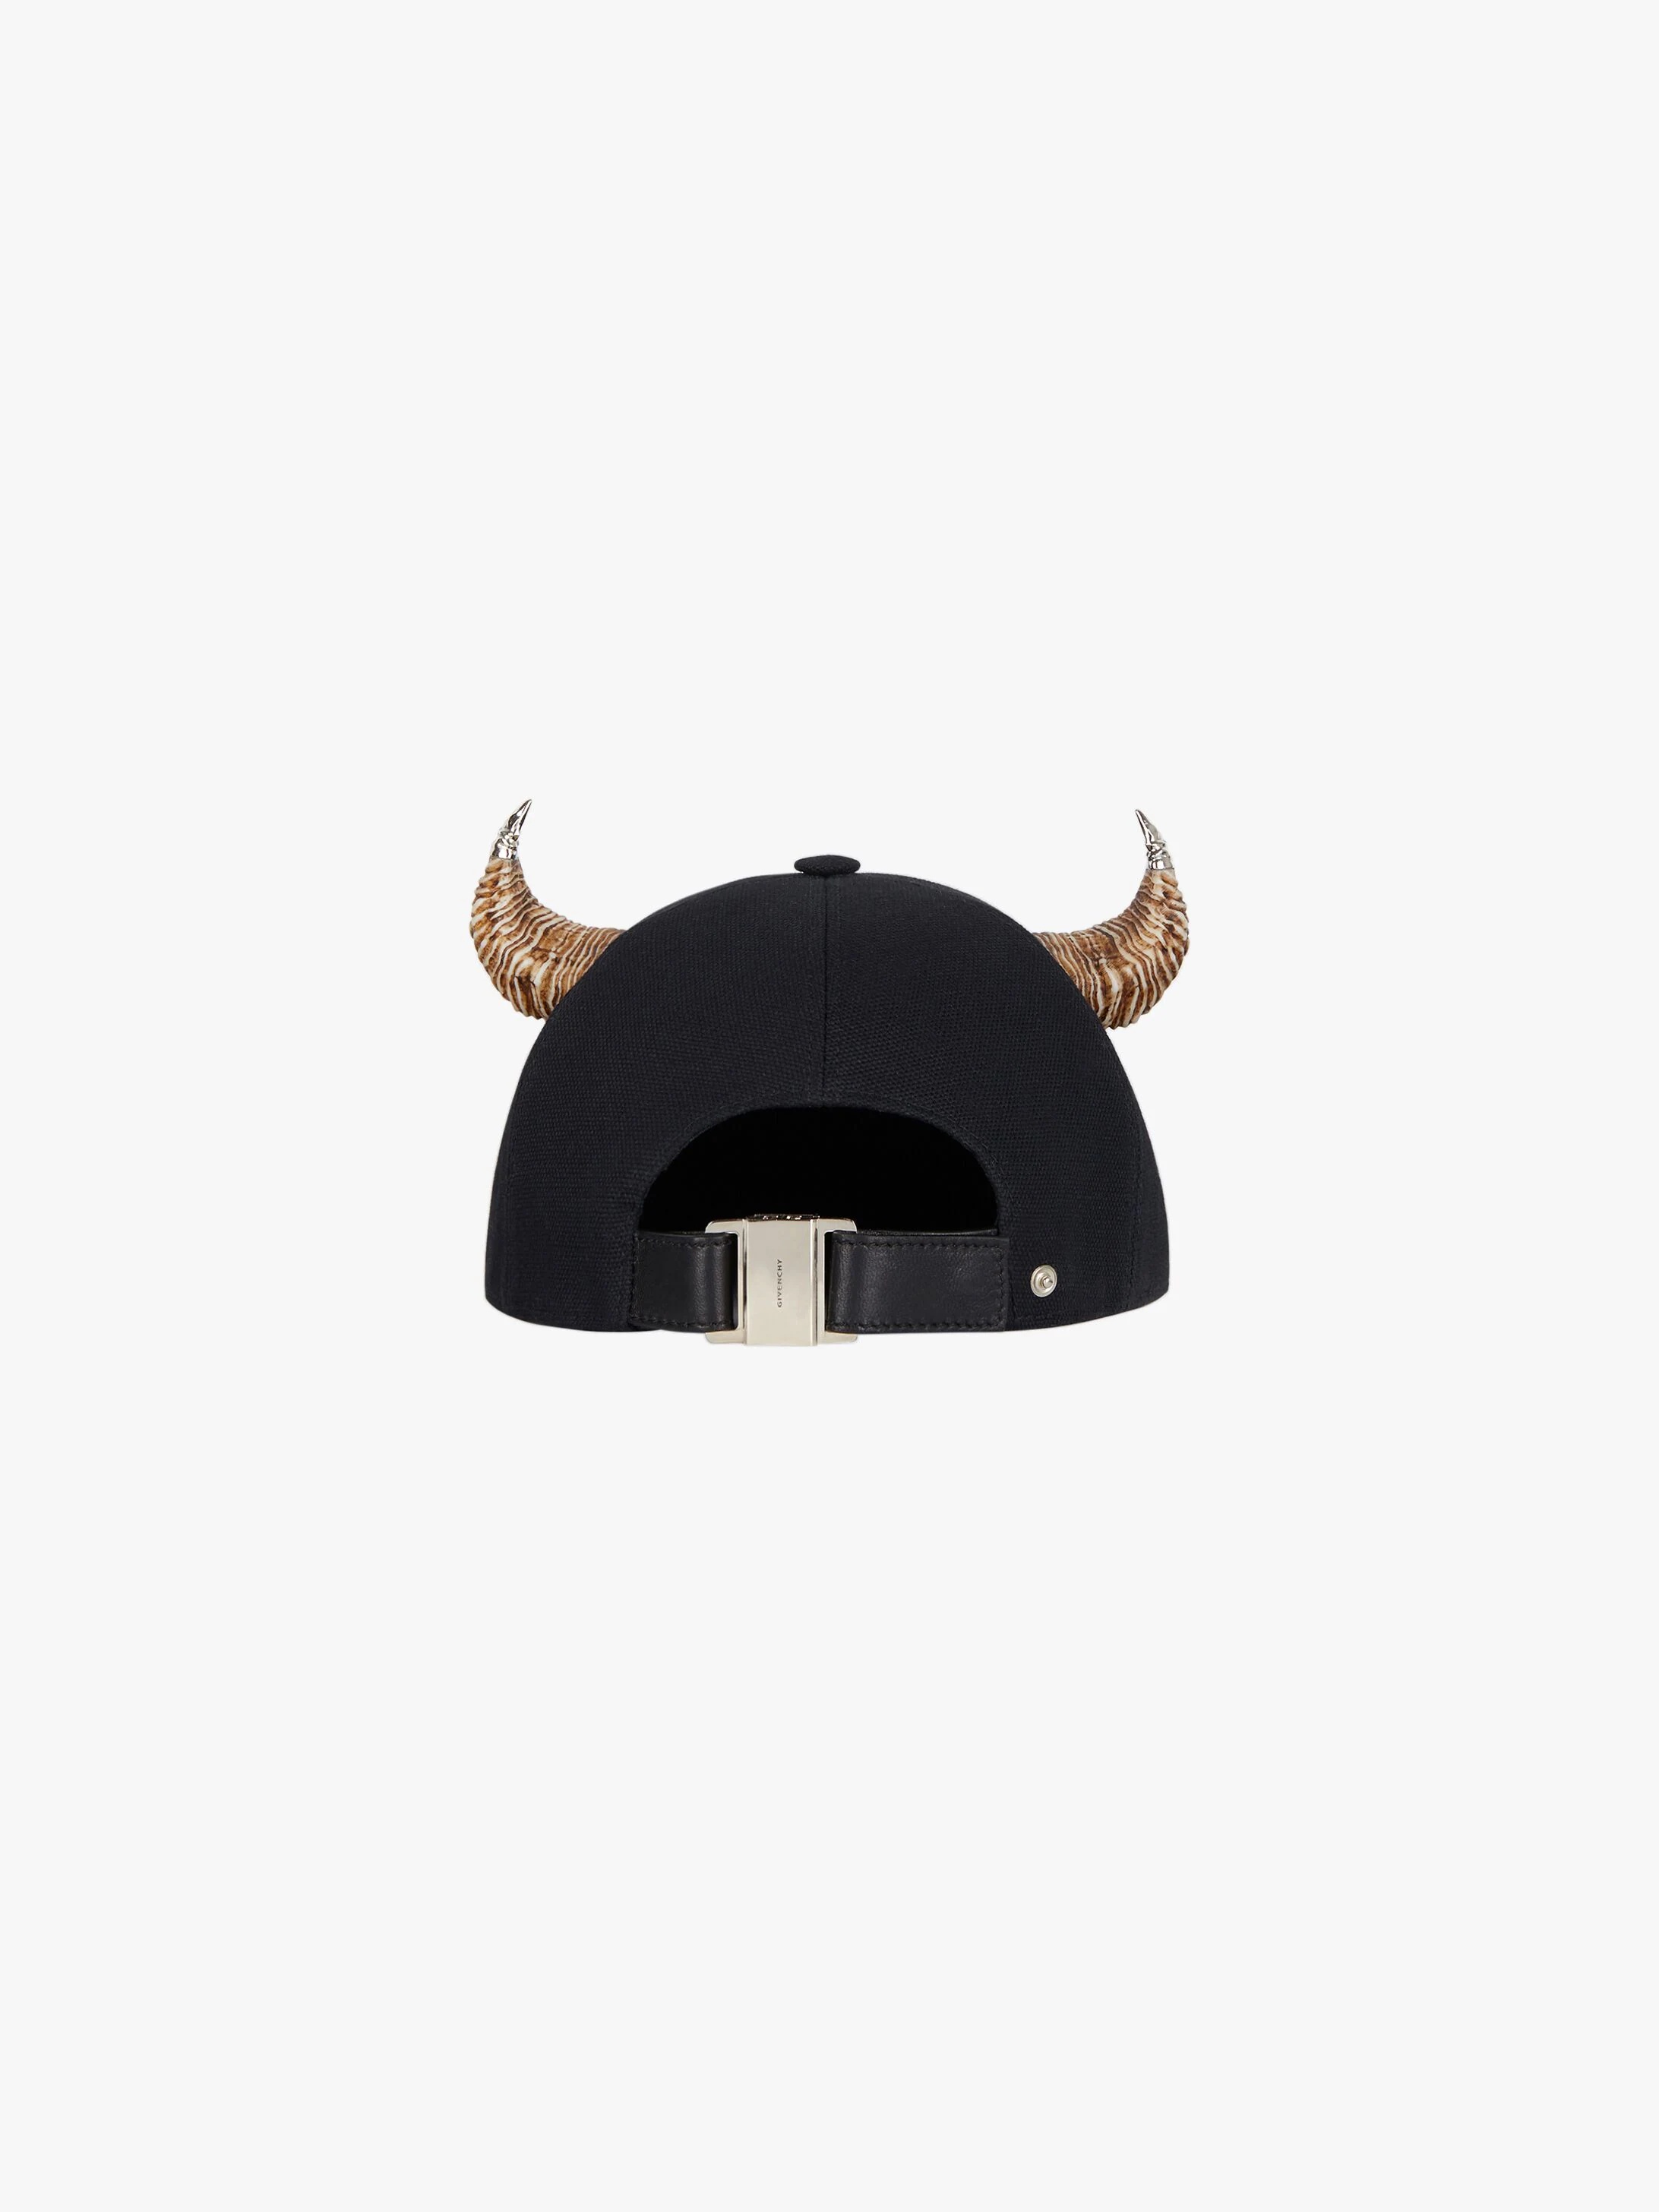 CAP IN CANVAS WITH HORNS - 2